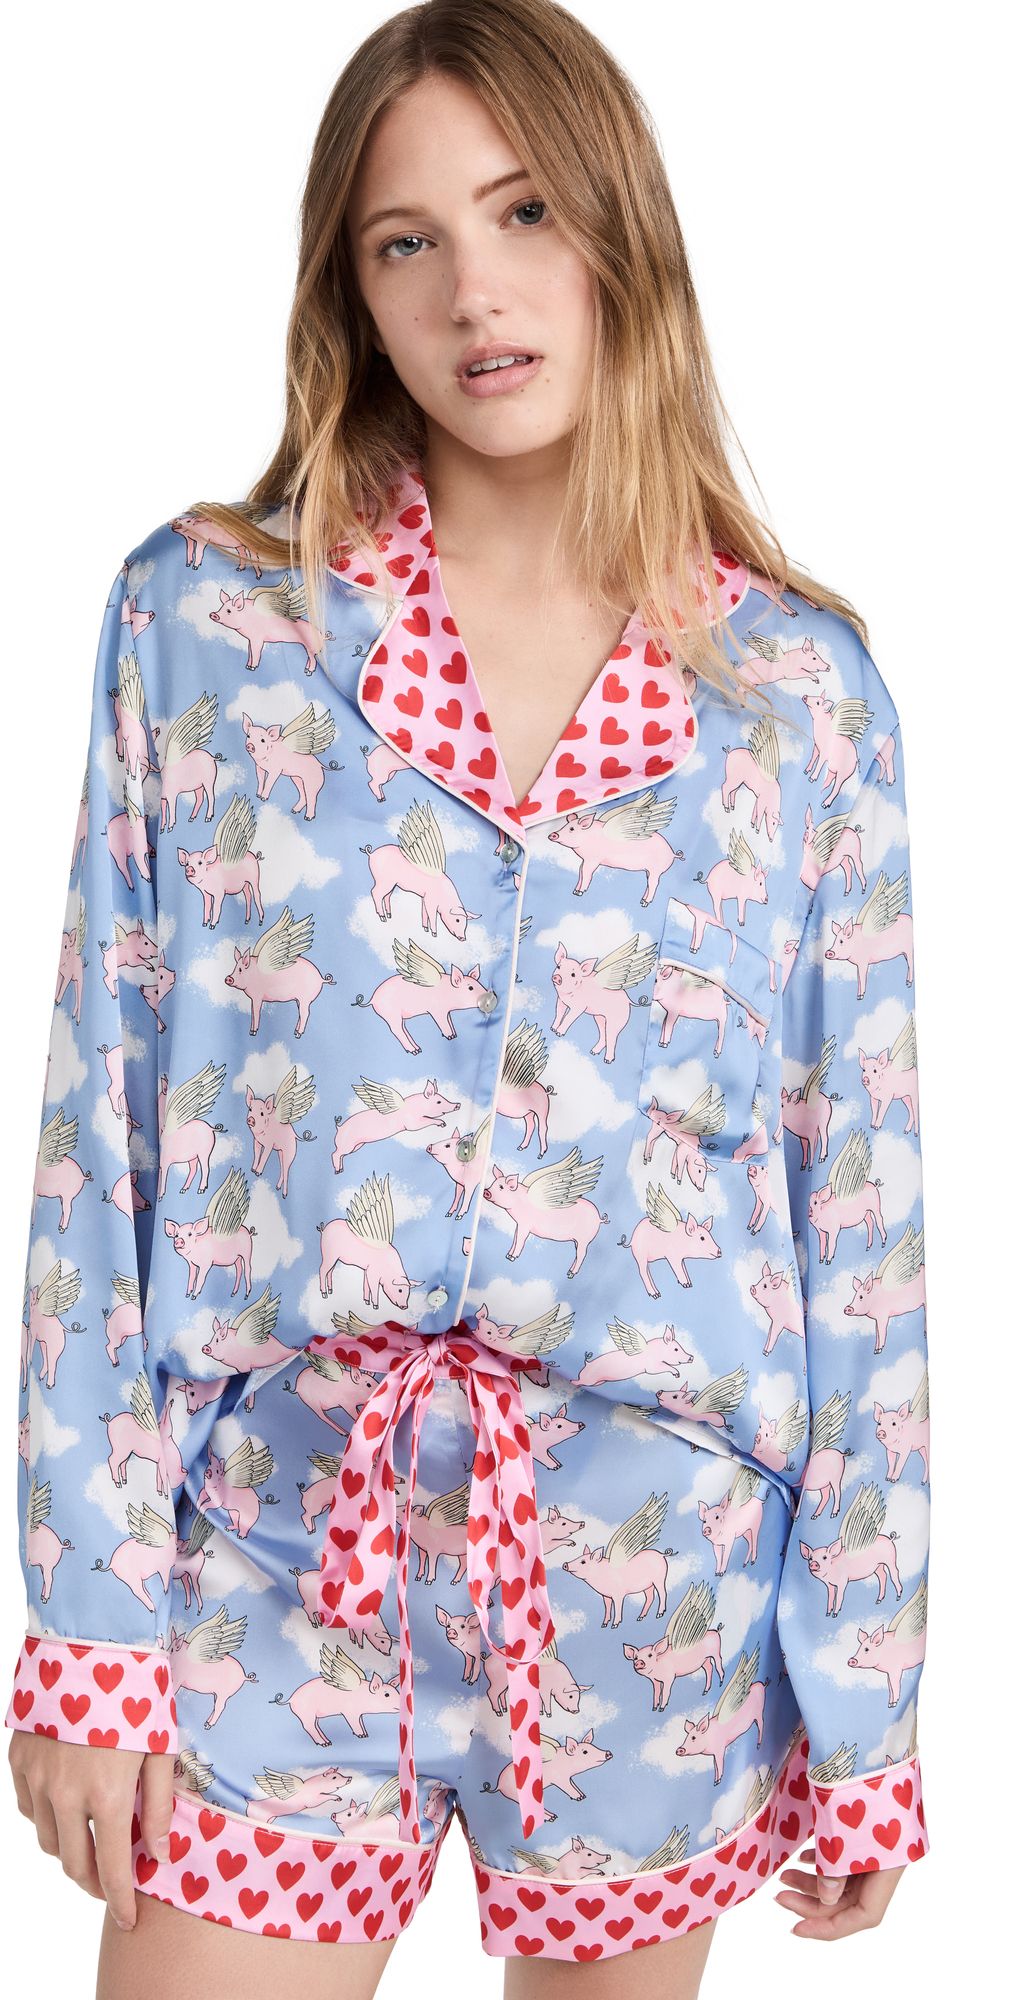 Pigs Might Fly Classic Long Sleeve Shirt with Shorts PJ Set | Shopbop